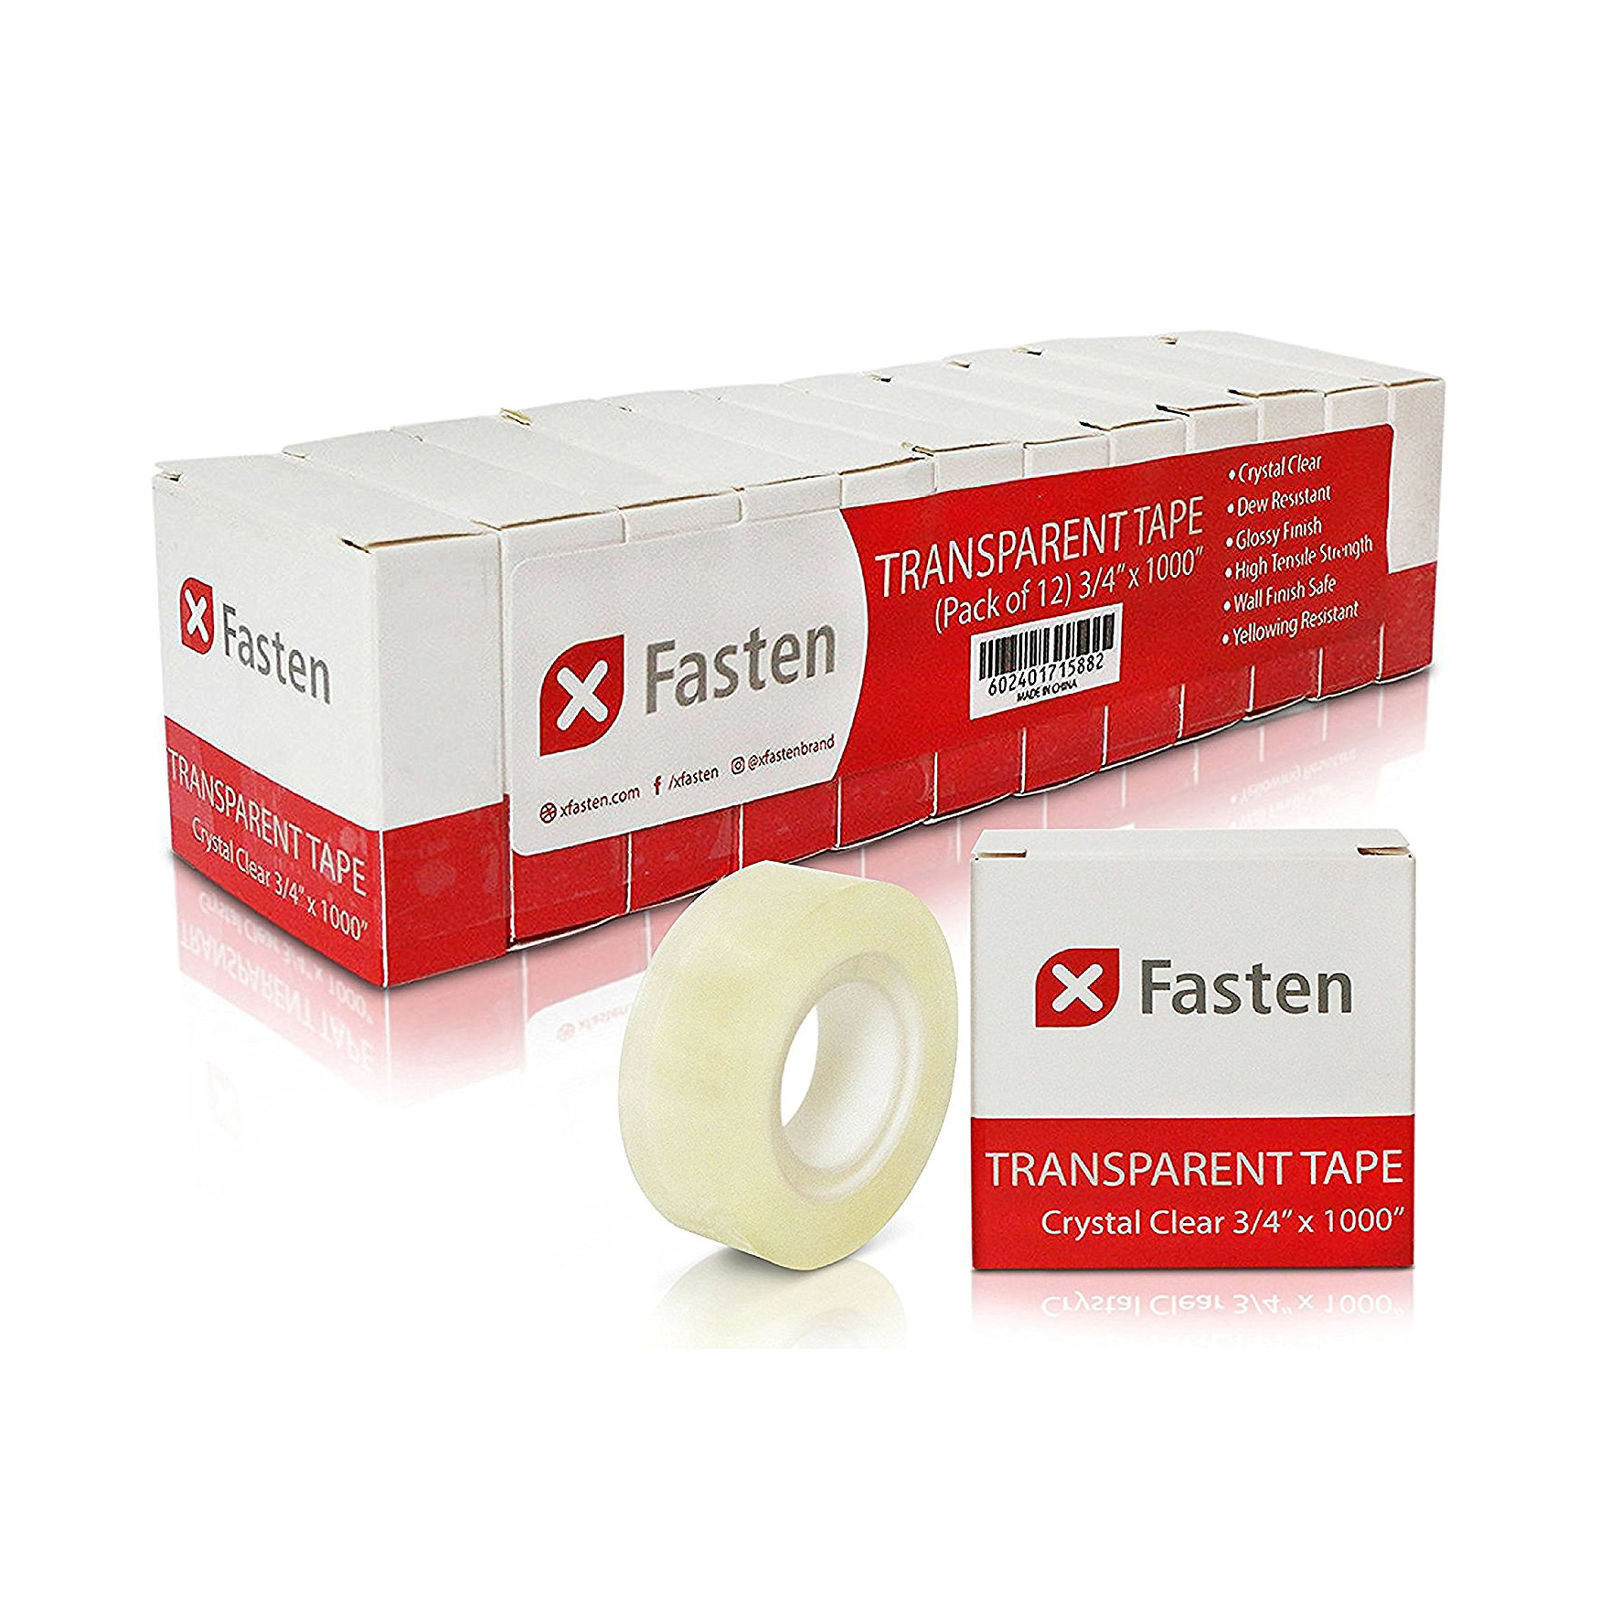 XFasten Crystal Clear Transparent Tape 3/4-Inch by 1000" (12 Pack)